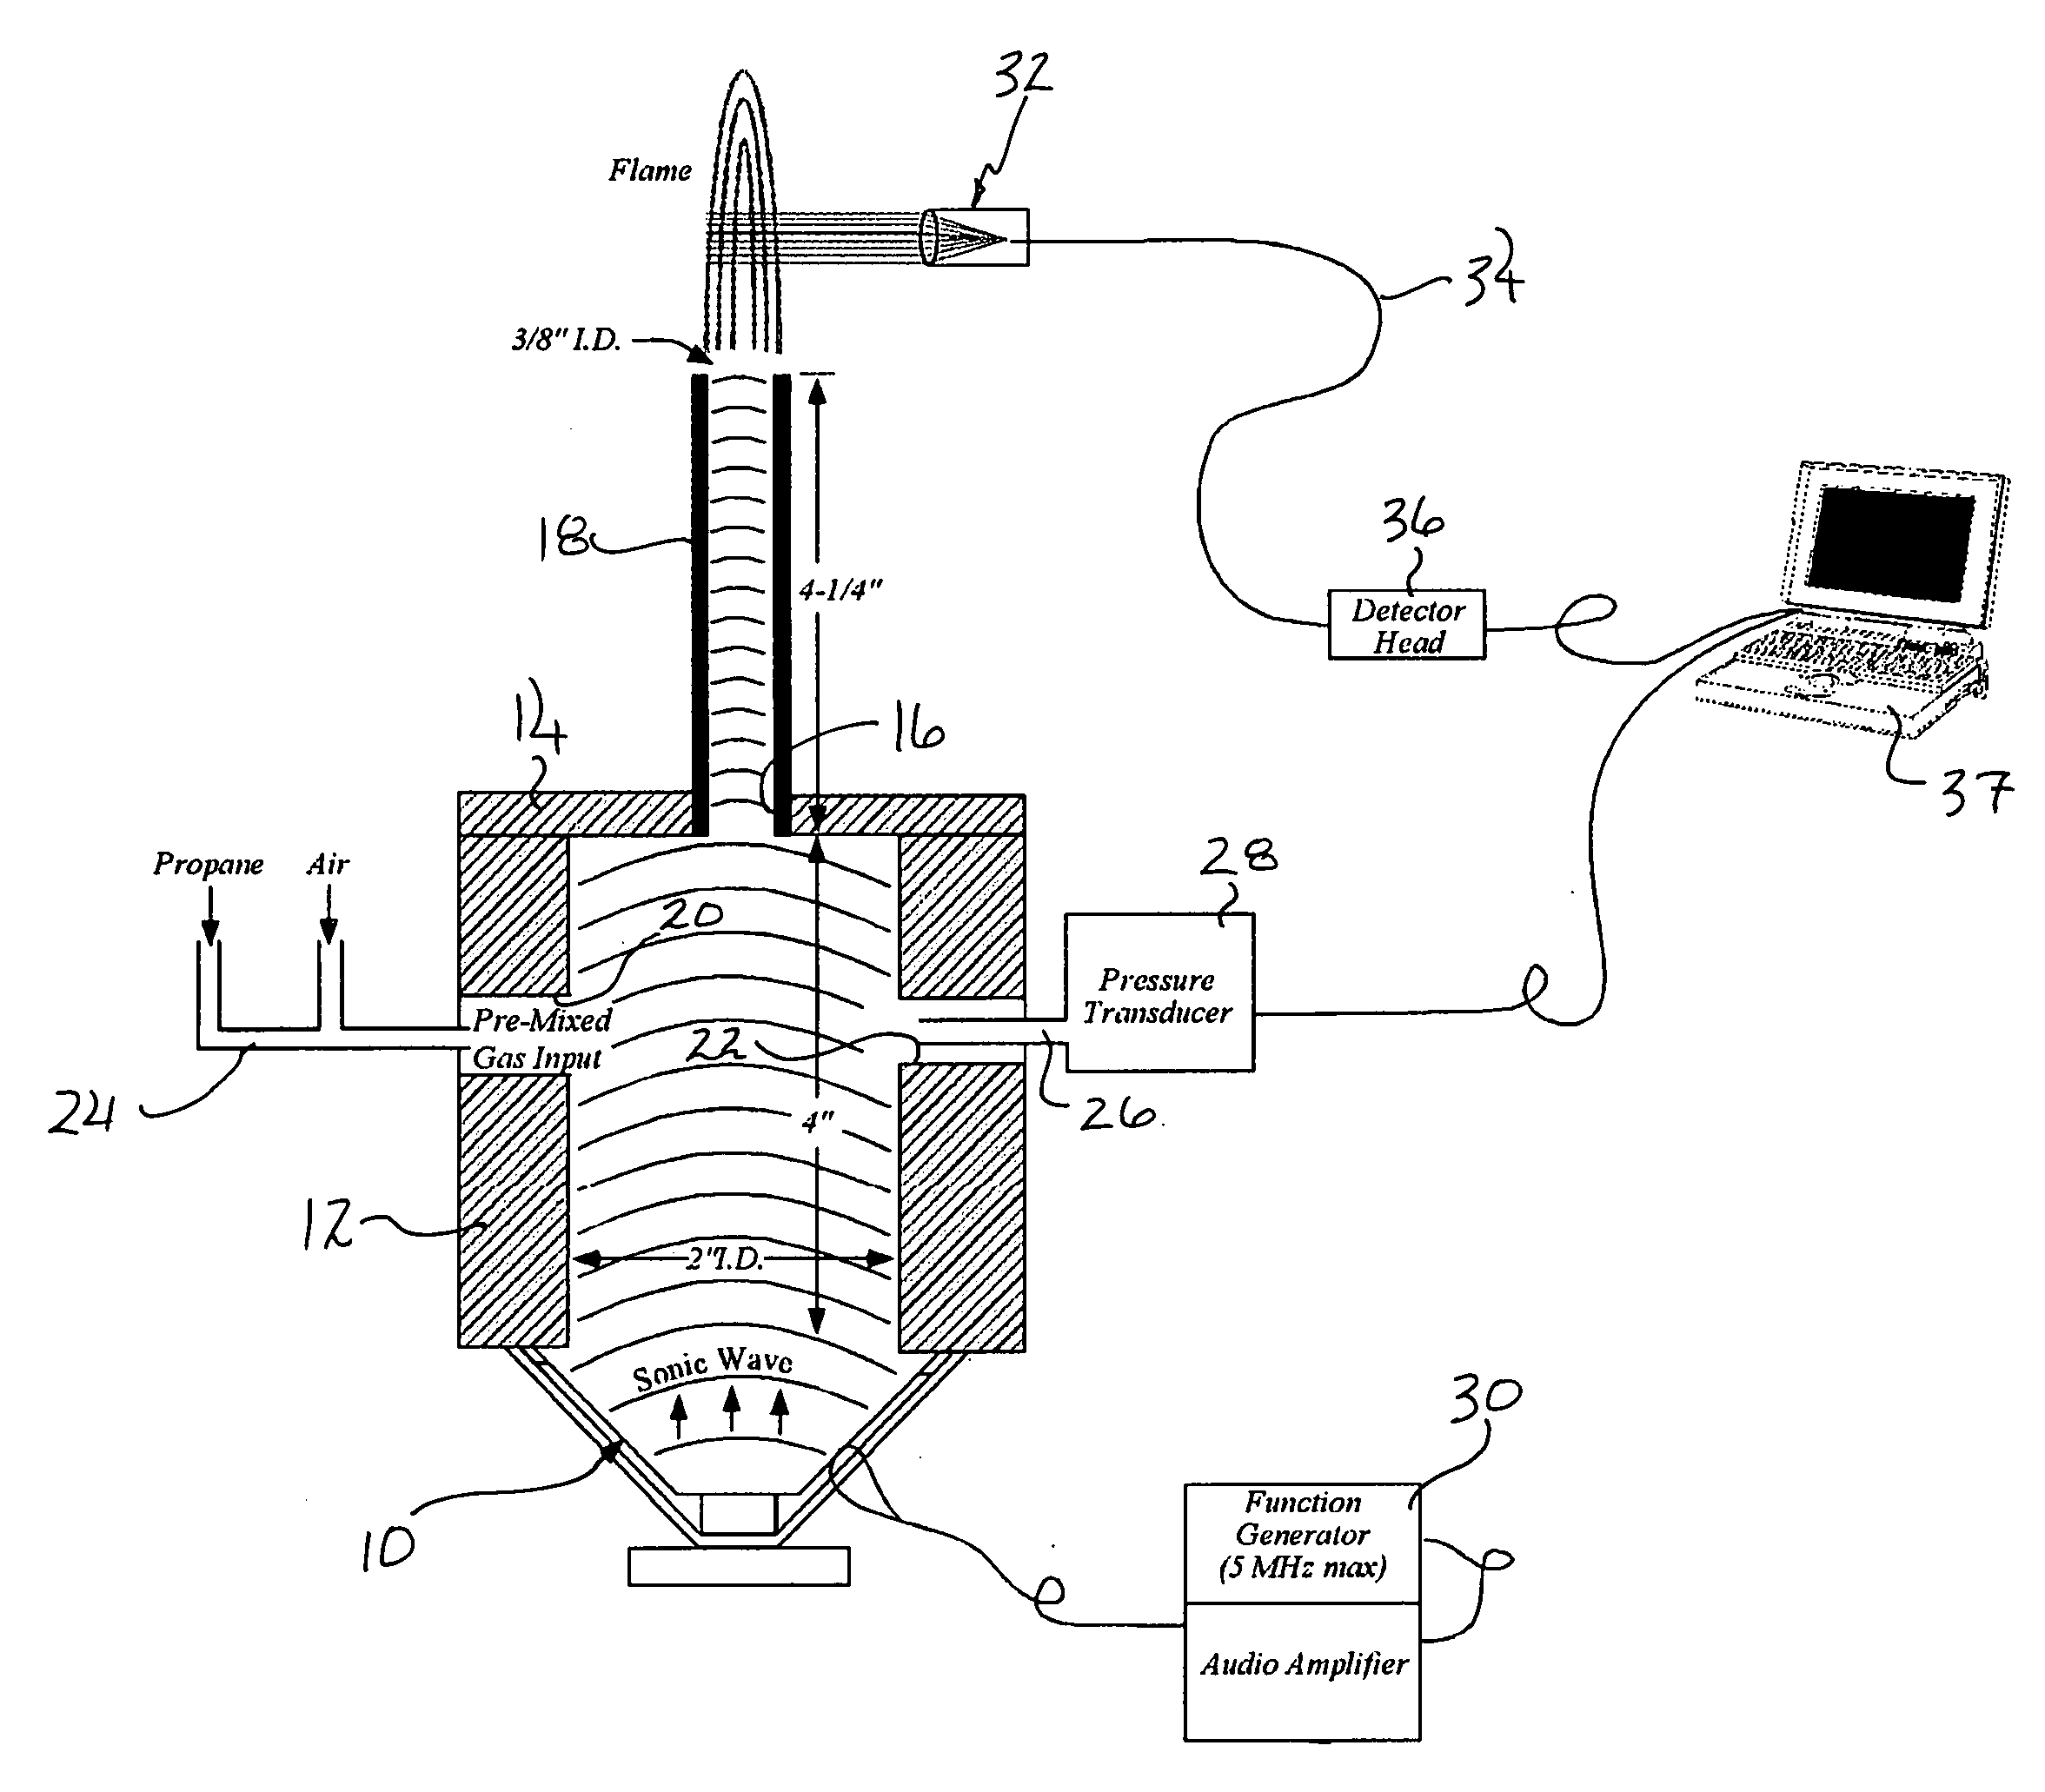 Method and apparatus for monitoring combustion instability and other performance deviations in turbine engines and like combustion systems